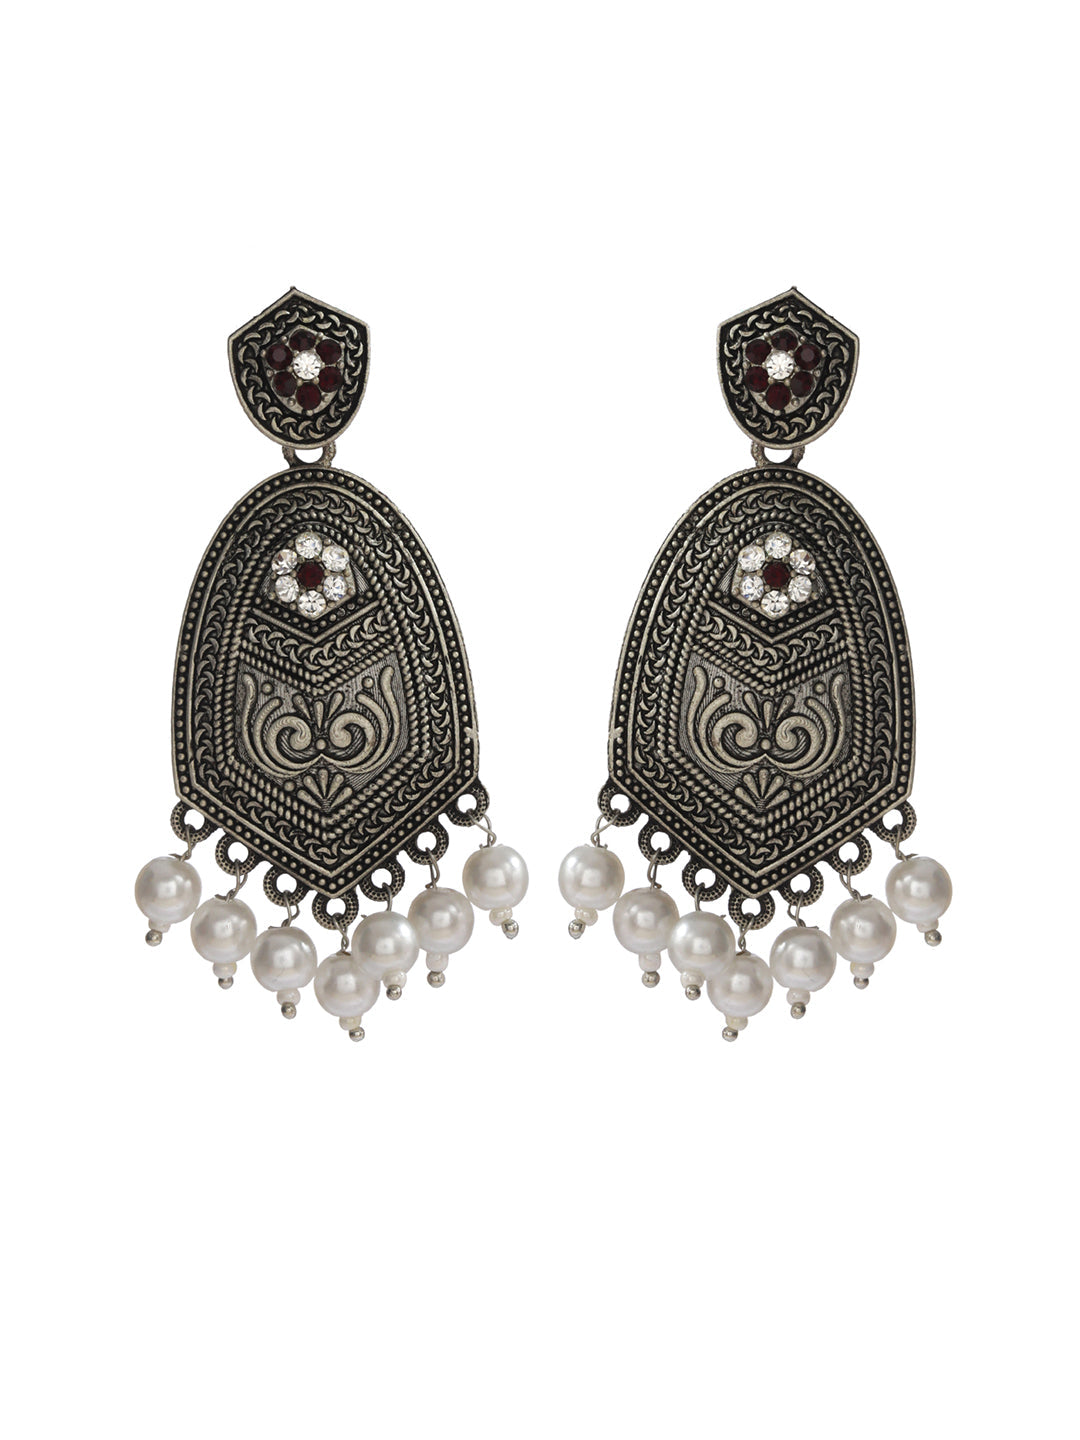 Studded Floral Oxidised Silver Pearl Drop Earrings - NOZ2TOZ